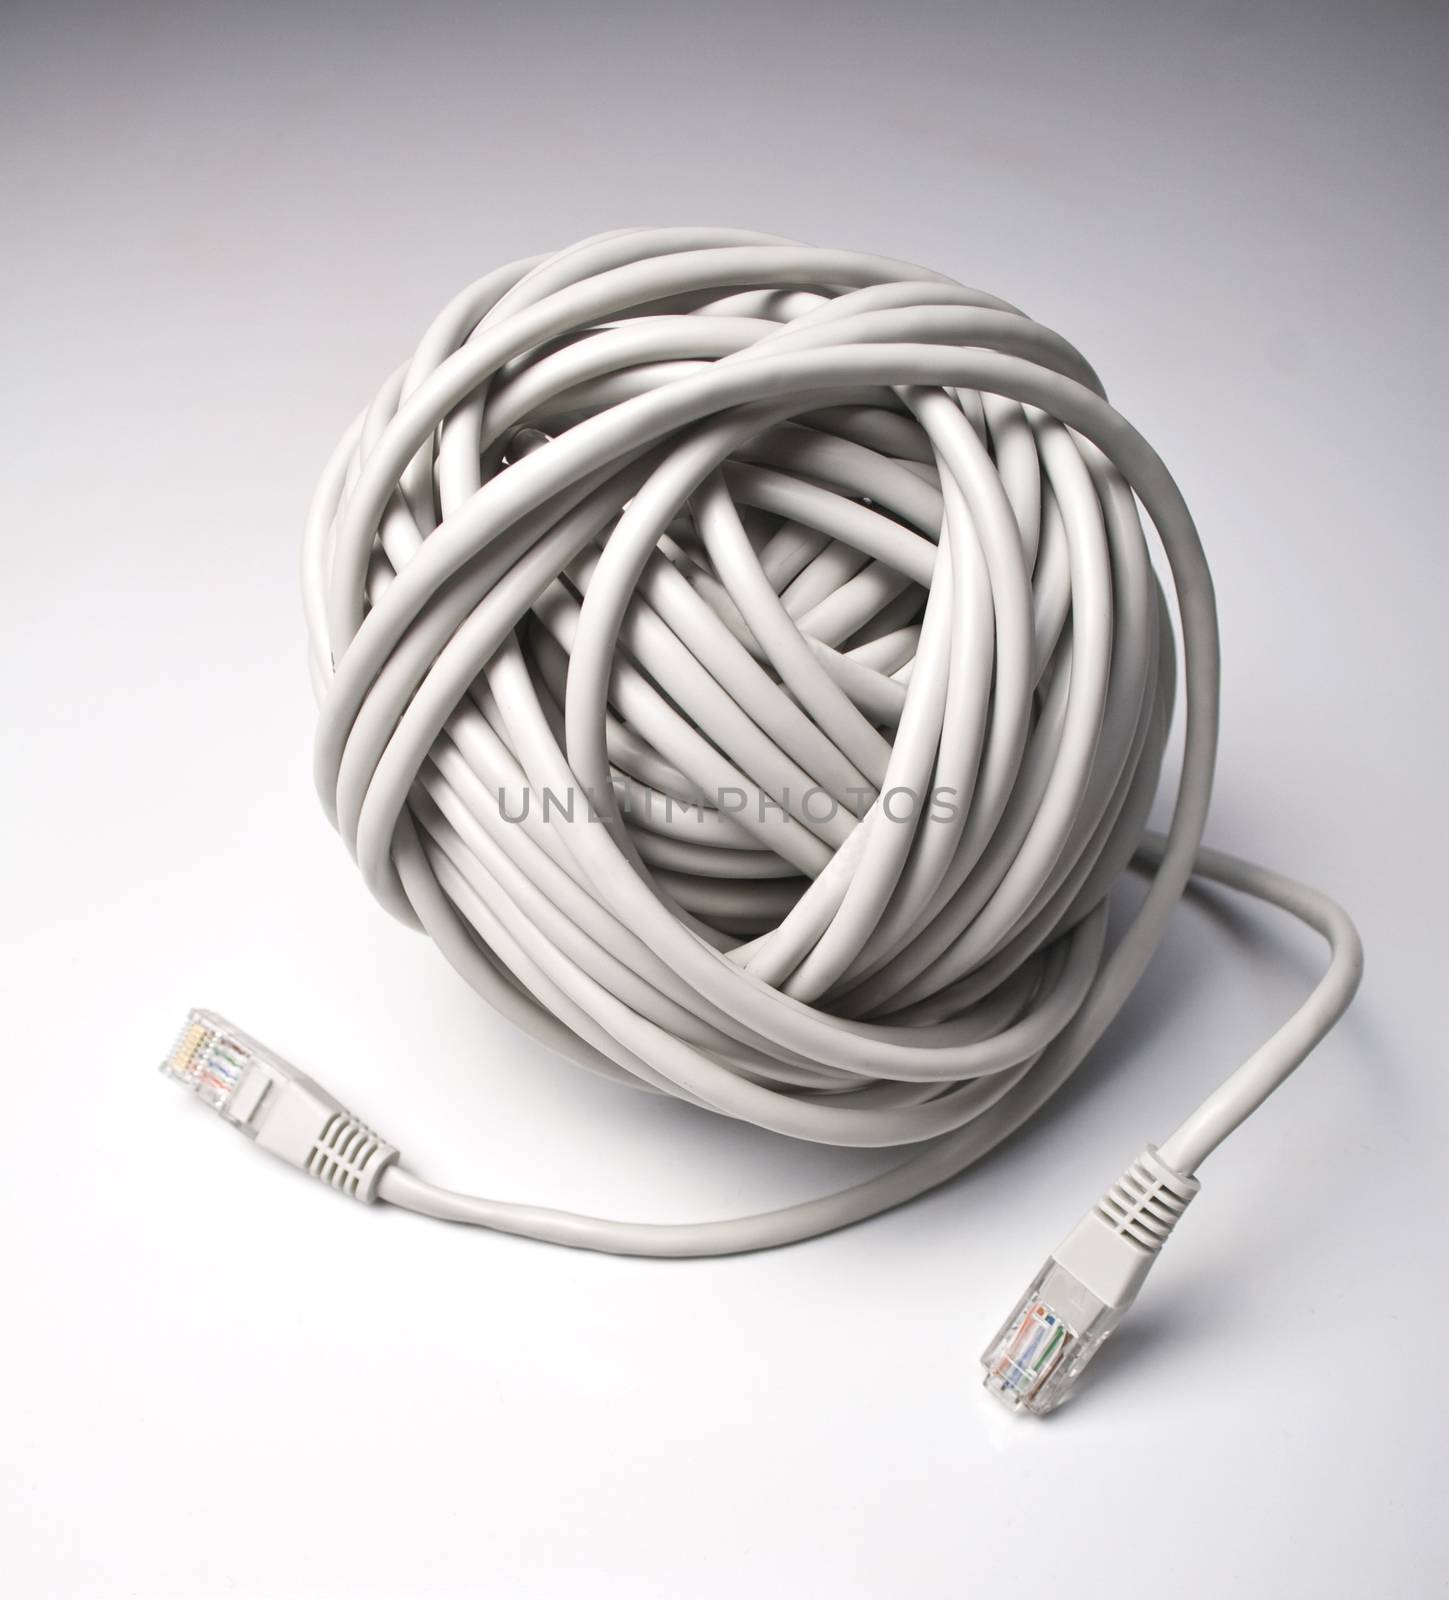 Ball of network cables by macondo